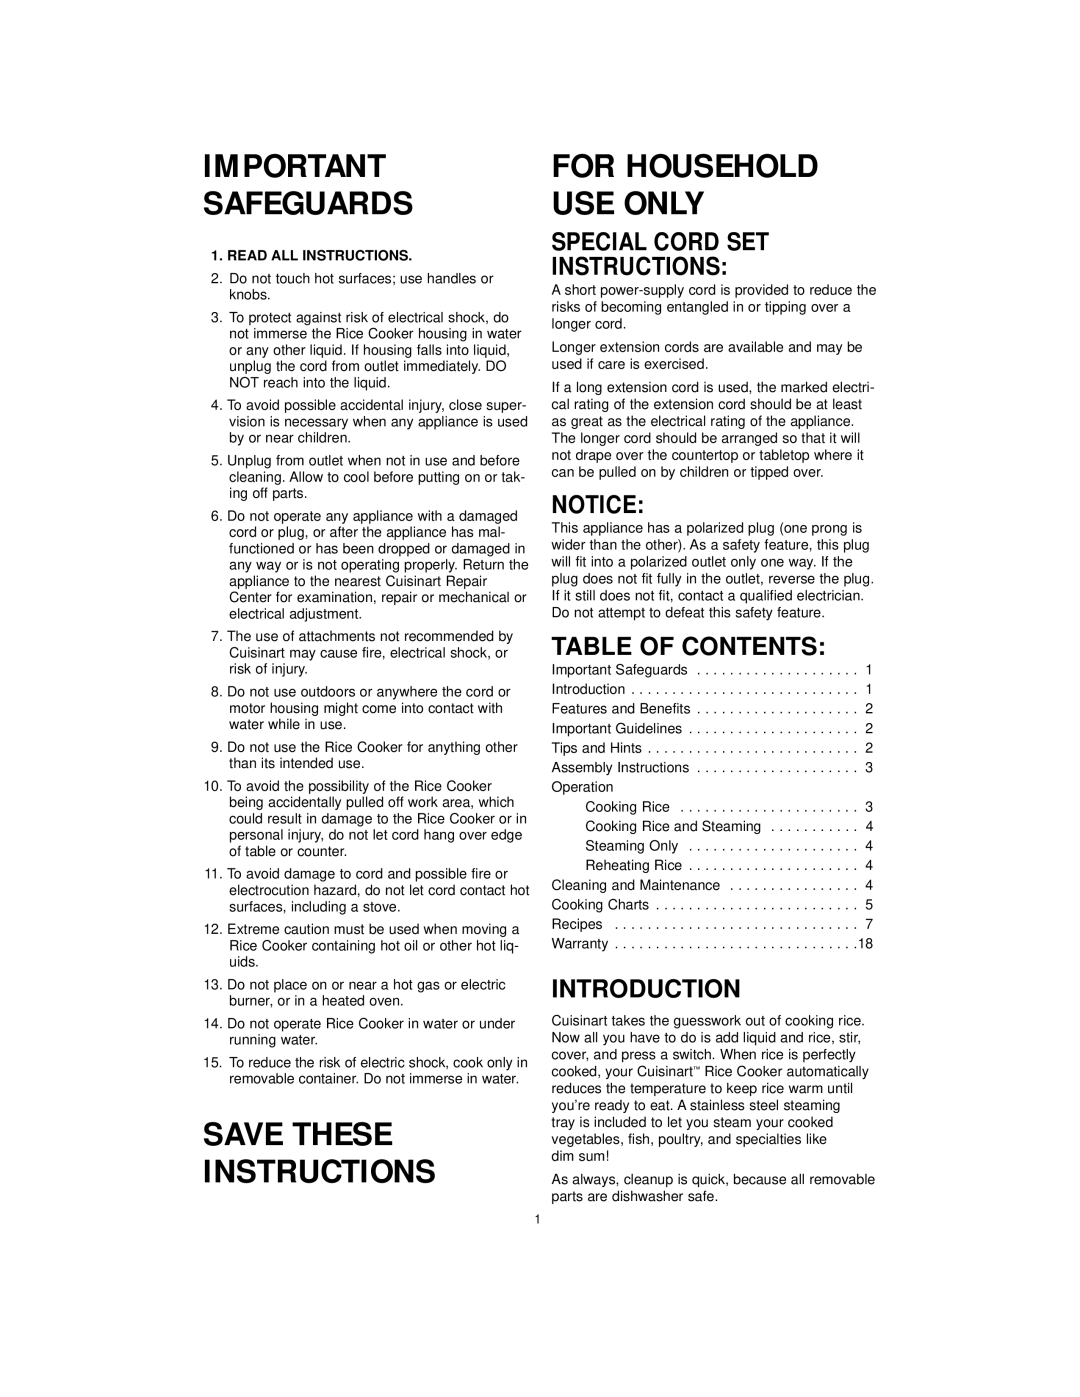 Cuisinart CRC-400C Safeguards, Save These Instructions, Special Cord Set Instructions, Table Of Contents, Introduction 